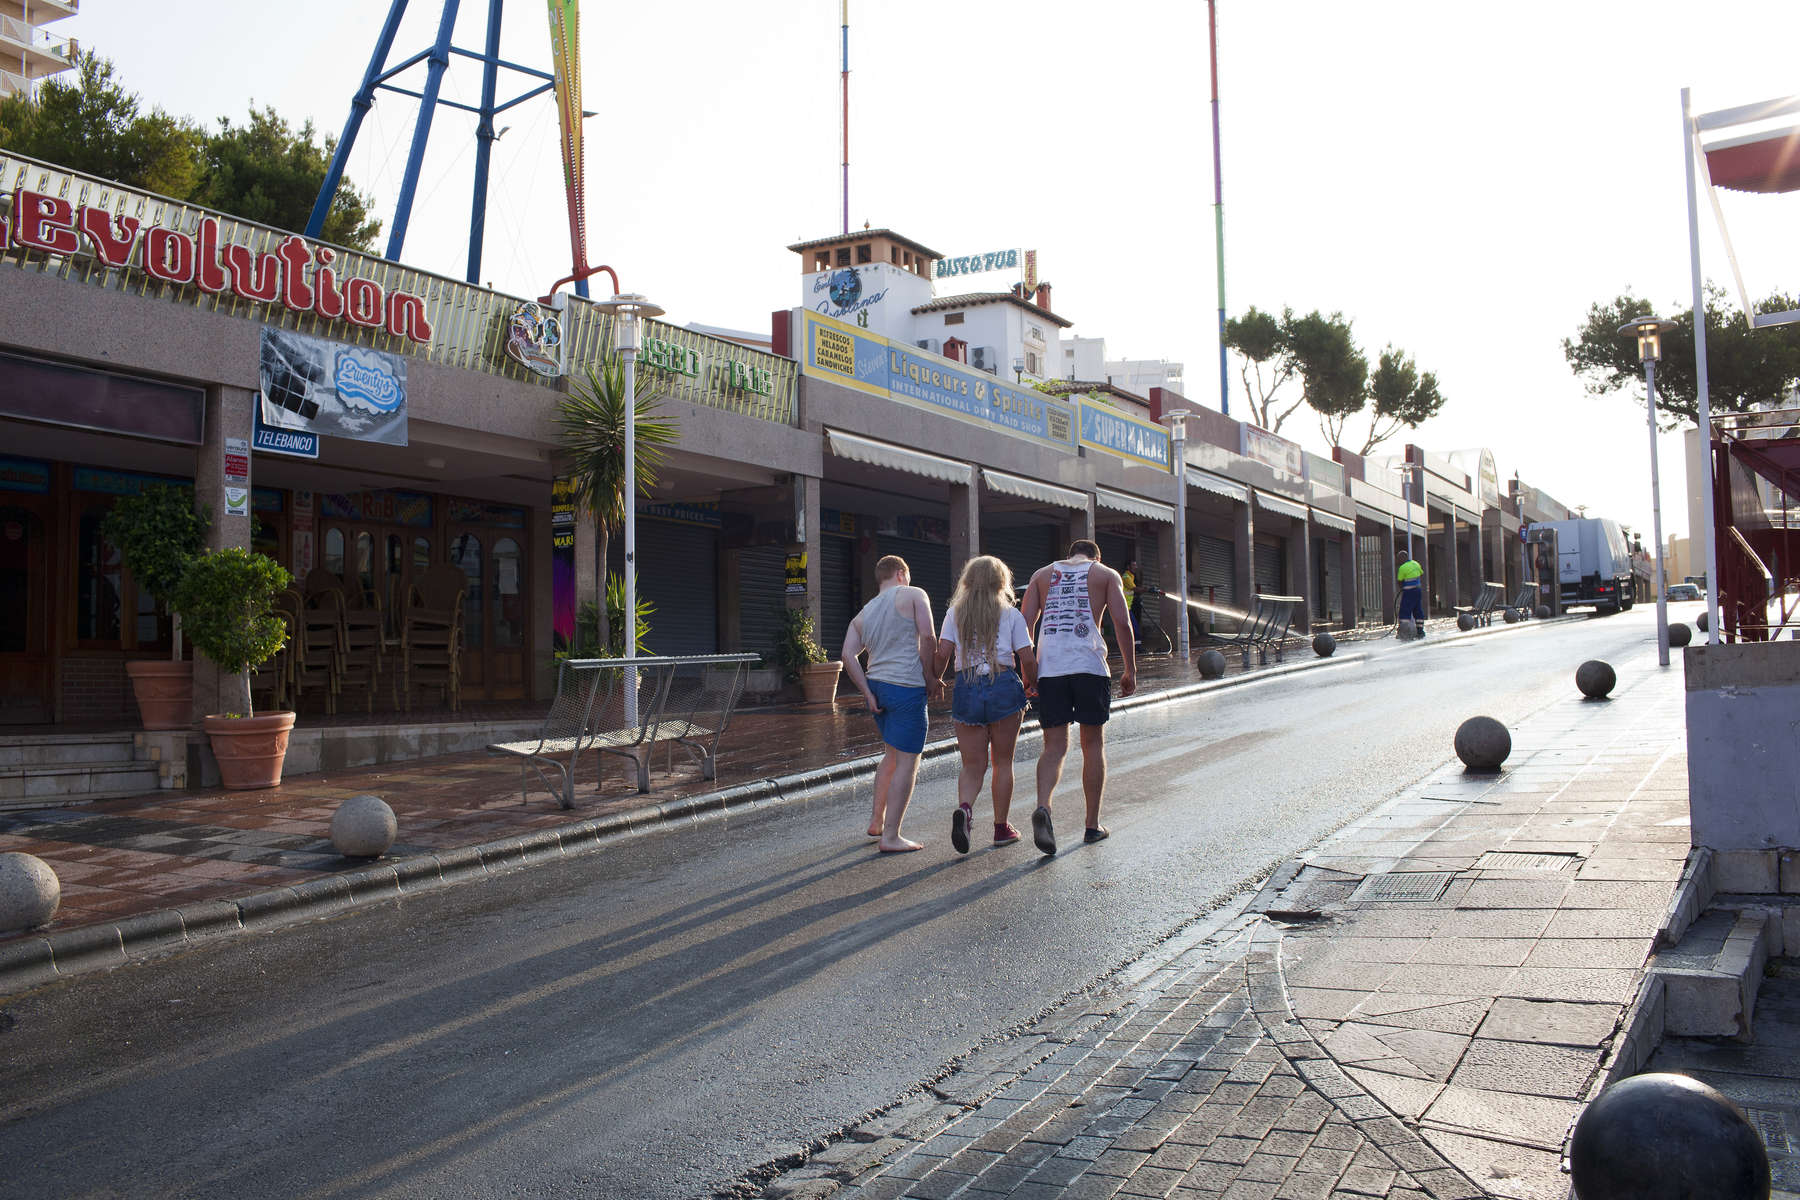 08:05 Three British friends make their way back to their accommodation as the sun rises over the main bar strip in Magaluf, Ibiza.